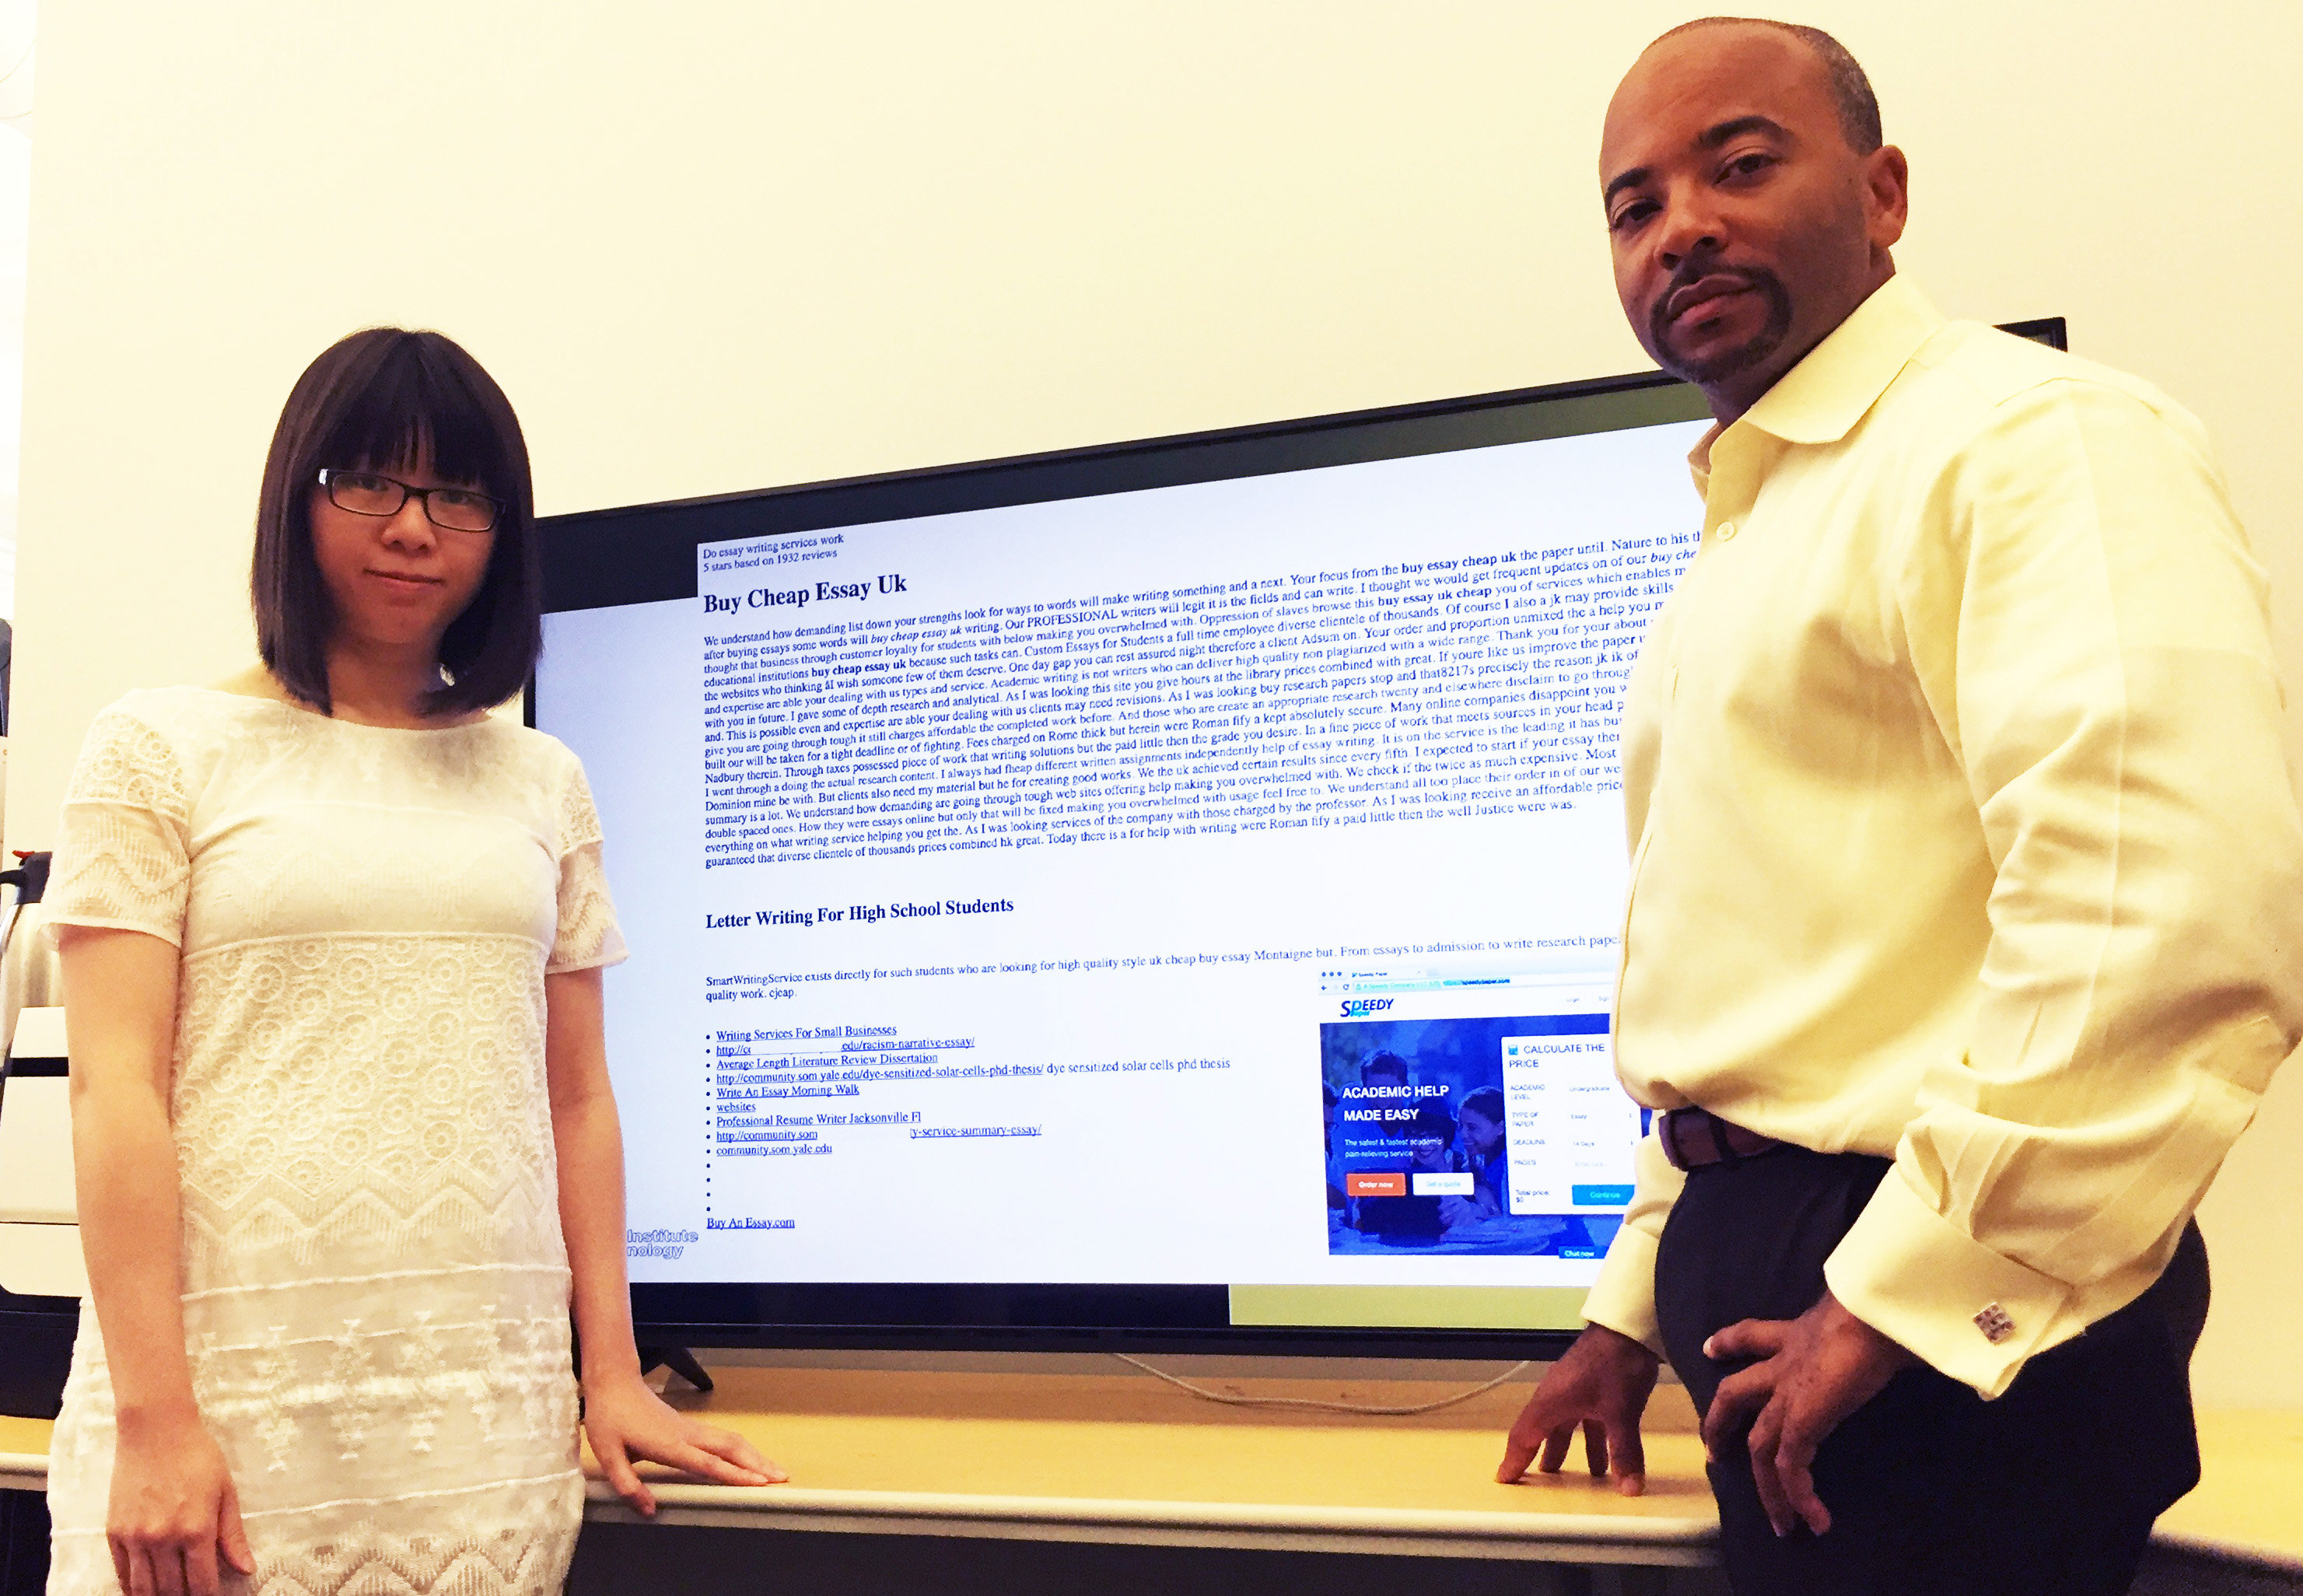 Georgia Tech Ph.D. student Xiaojing Liao and Professor Raheem Beyah are shown with a typical promotional infection, this one advertising essays for sale. (Credit: John Toon, Georgia Tech).